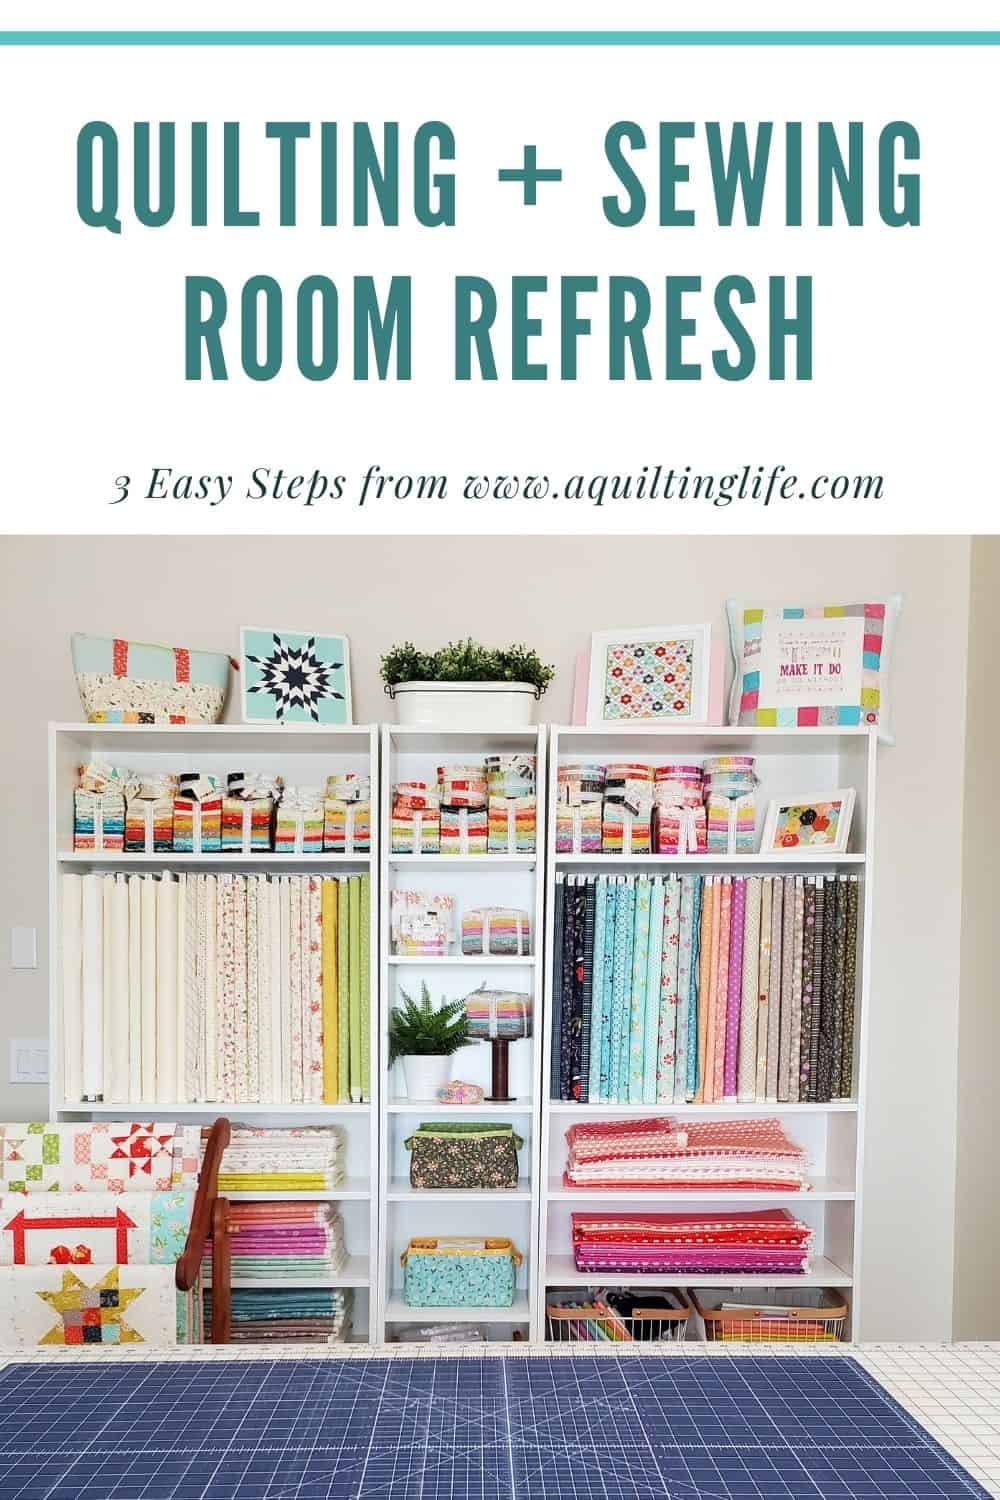 Quilting and Sewing Room Refresh: 3 Easy Steps featured by Top US Quilt Blog, A Quilting Life